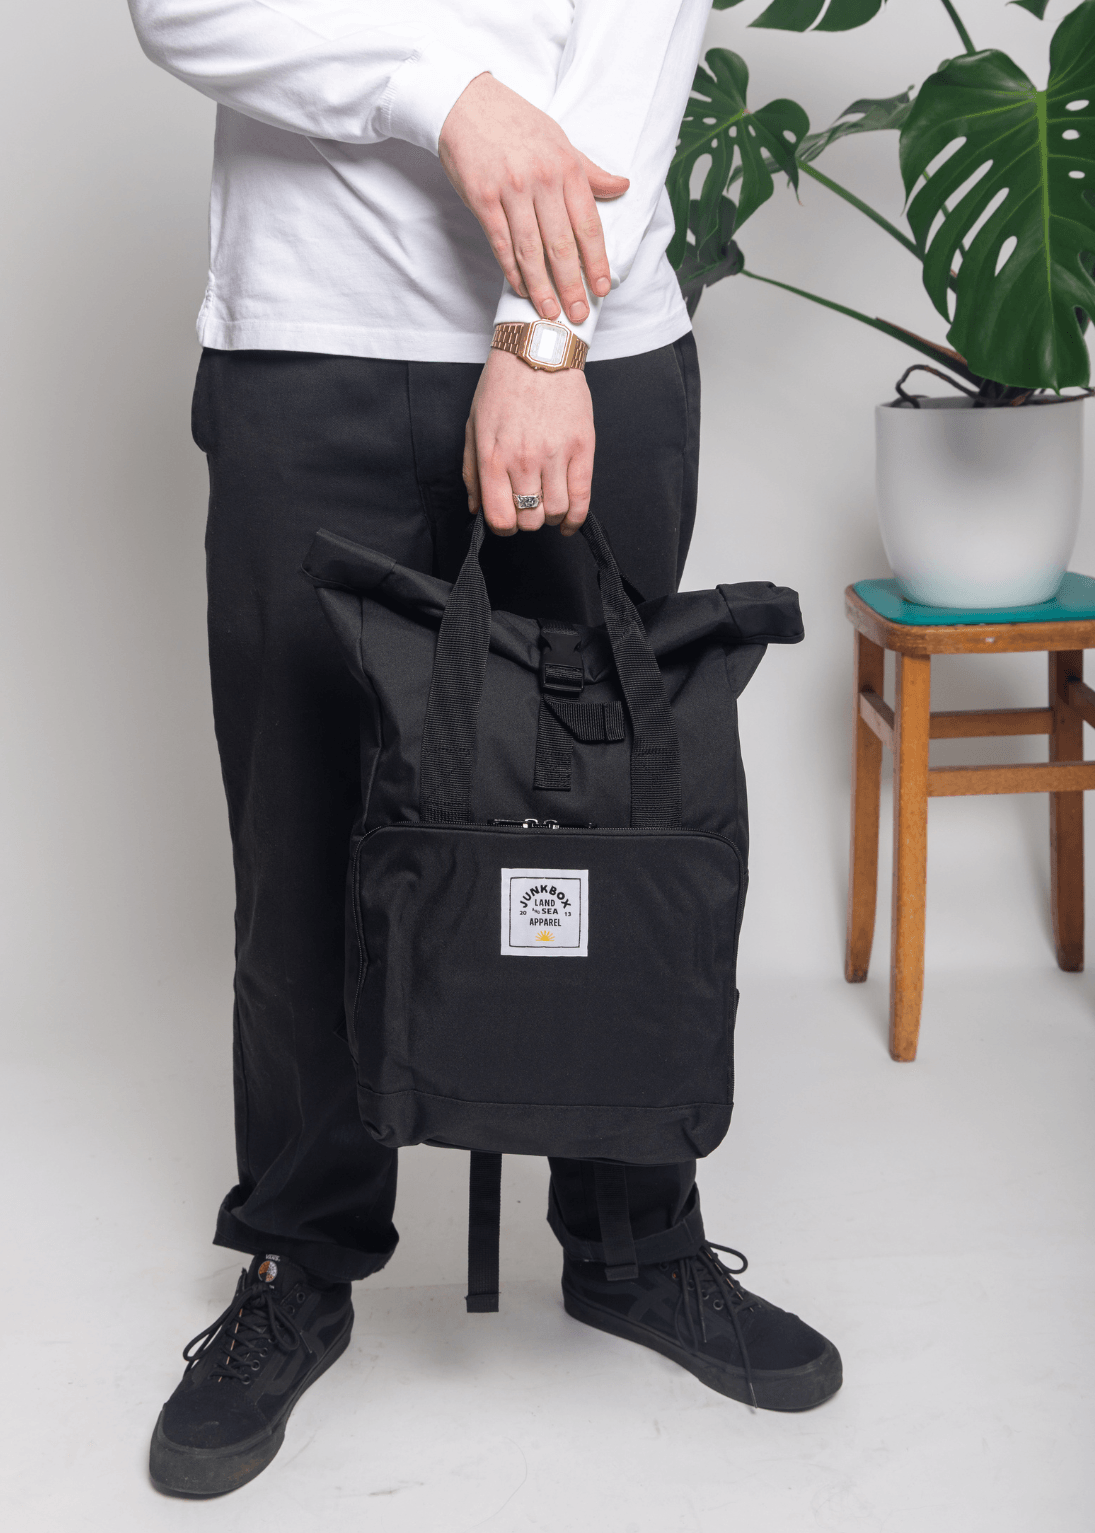 The Adventurer' Recycled Roll-Top Backpack in Petrol Blue – Junkbox Apparel